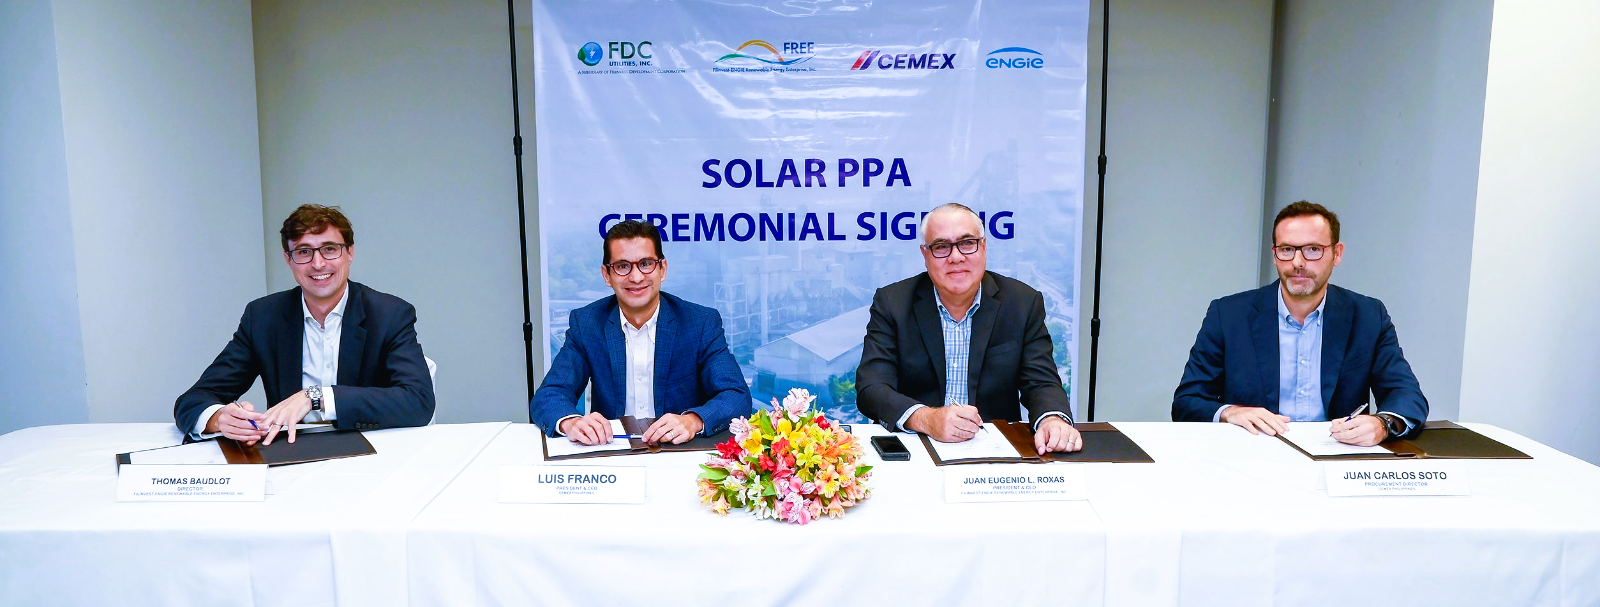 CEMEX and FREE executives at signing ceremony for 10.08 MW ground mounted solar array in the Philippines